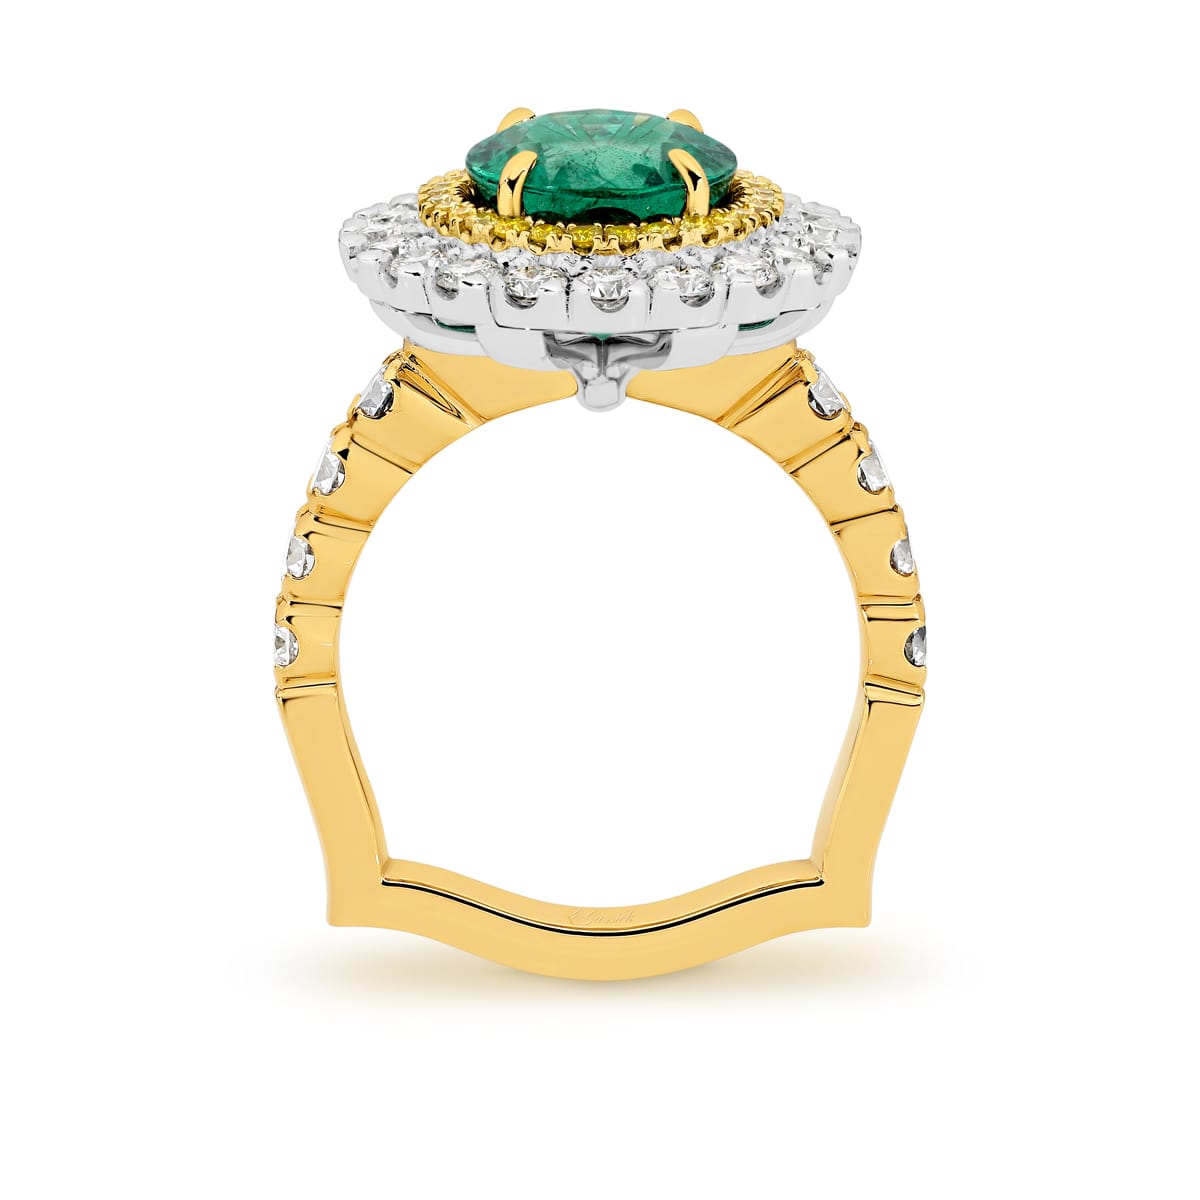 Kai-Mana features natural 3.79 carat oval-cut emerald enhanced by a halo of 28 fancy intense natural yellow diamonds. Surrounded the yellow diamonds in a halo of 20 white round billing cut diamonds. Kai-Mana also features 8 round brilliant cut white diamonds on the band. She was designed and handcrafted by LeGassick's Master Jewellers, Gold Coast, Australia.